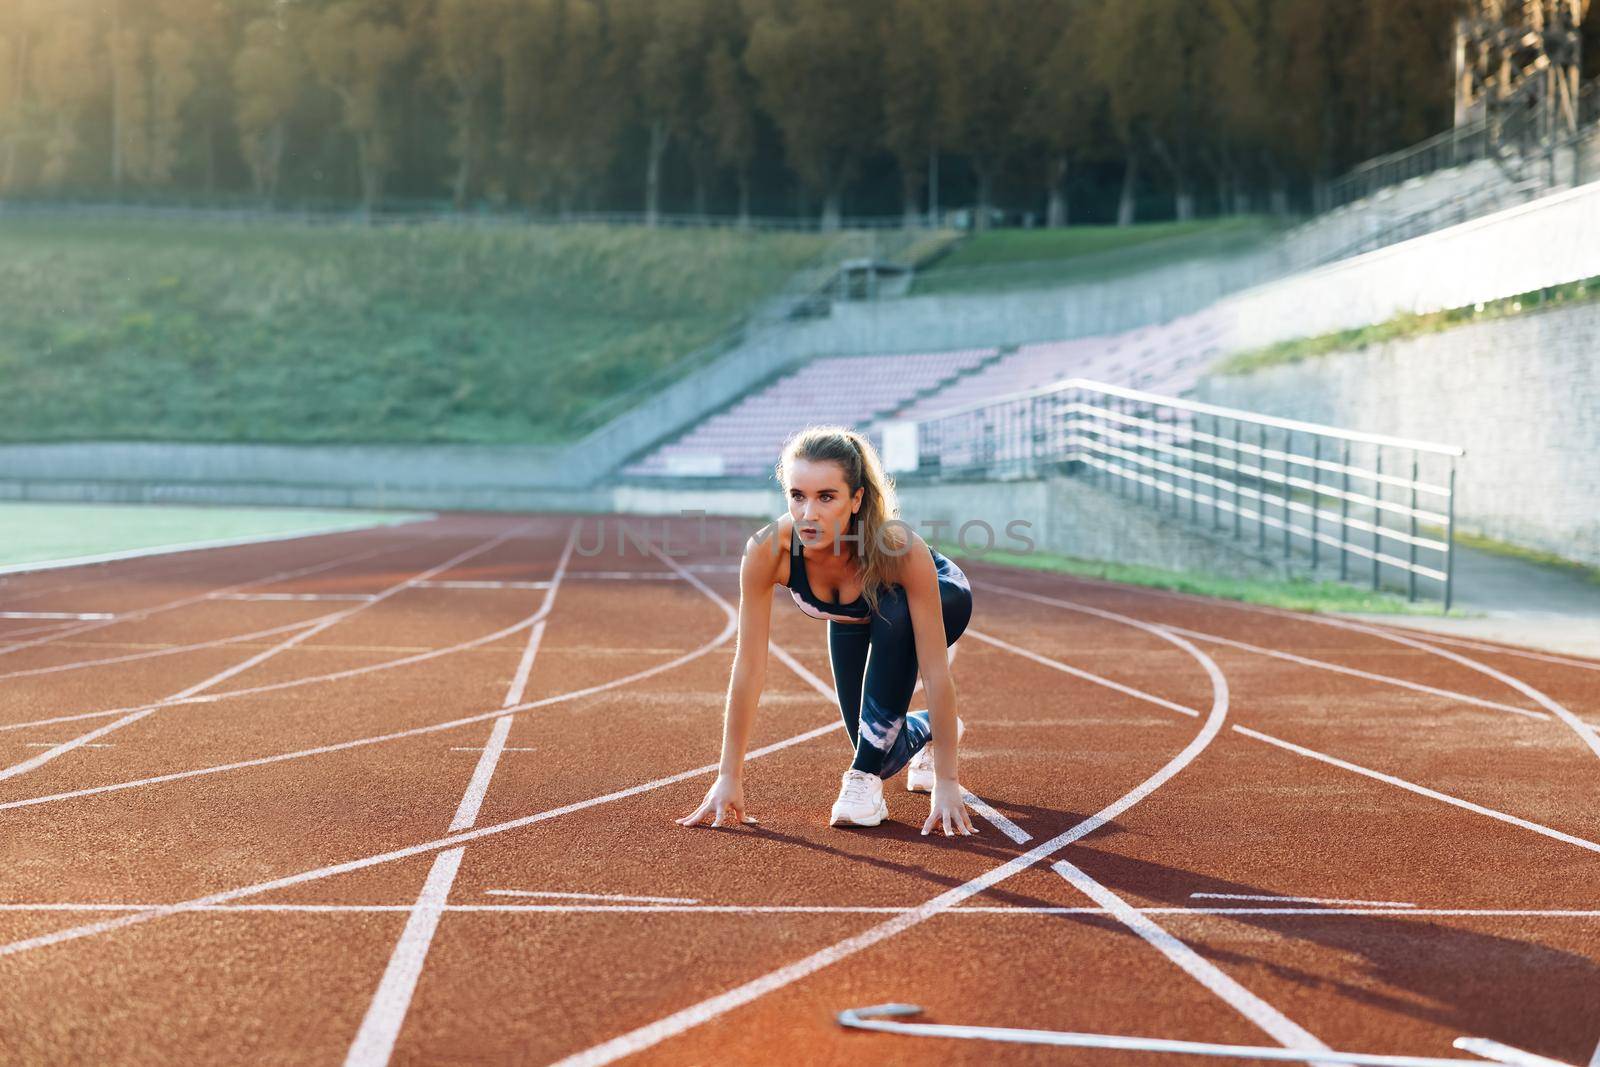 Female athlete starting her sprint on a running track. Runner taking off from the starting blocks on running track. Jogger activity. Female athlete. Sportswoman. Cardio exercises. Workout concept by uflypro